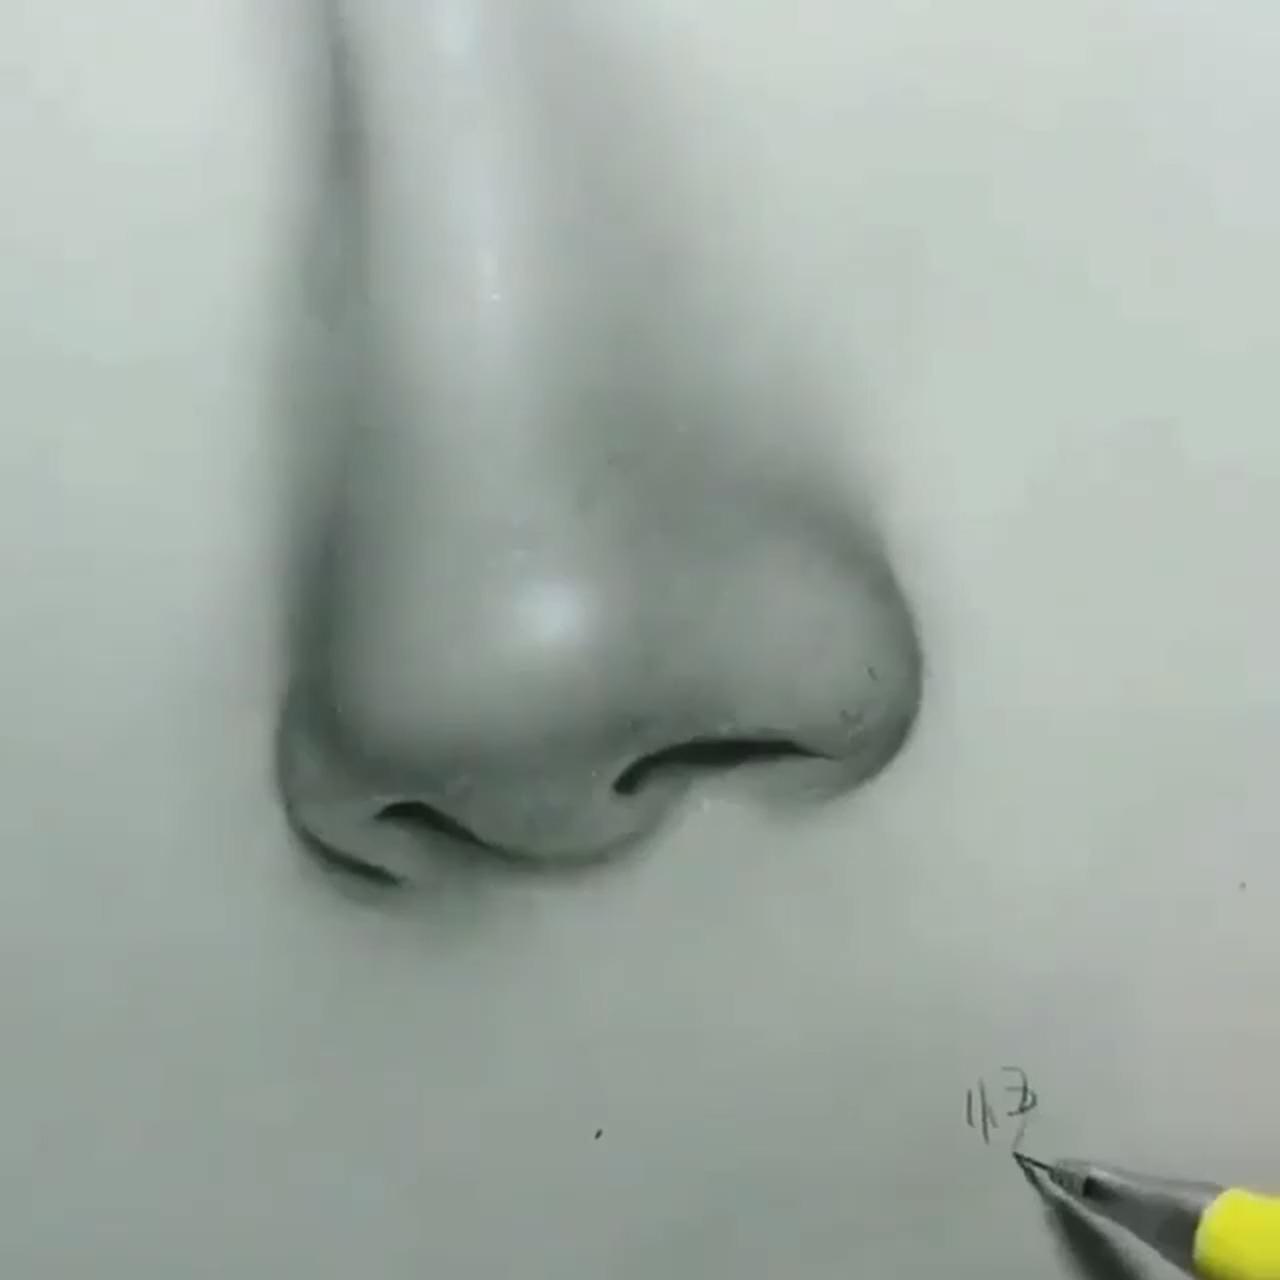 Does it look realistic | pencil sketch images